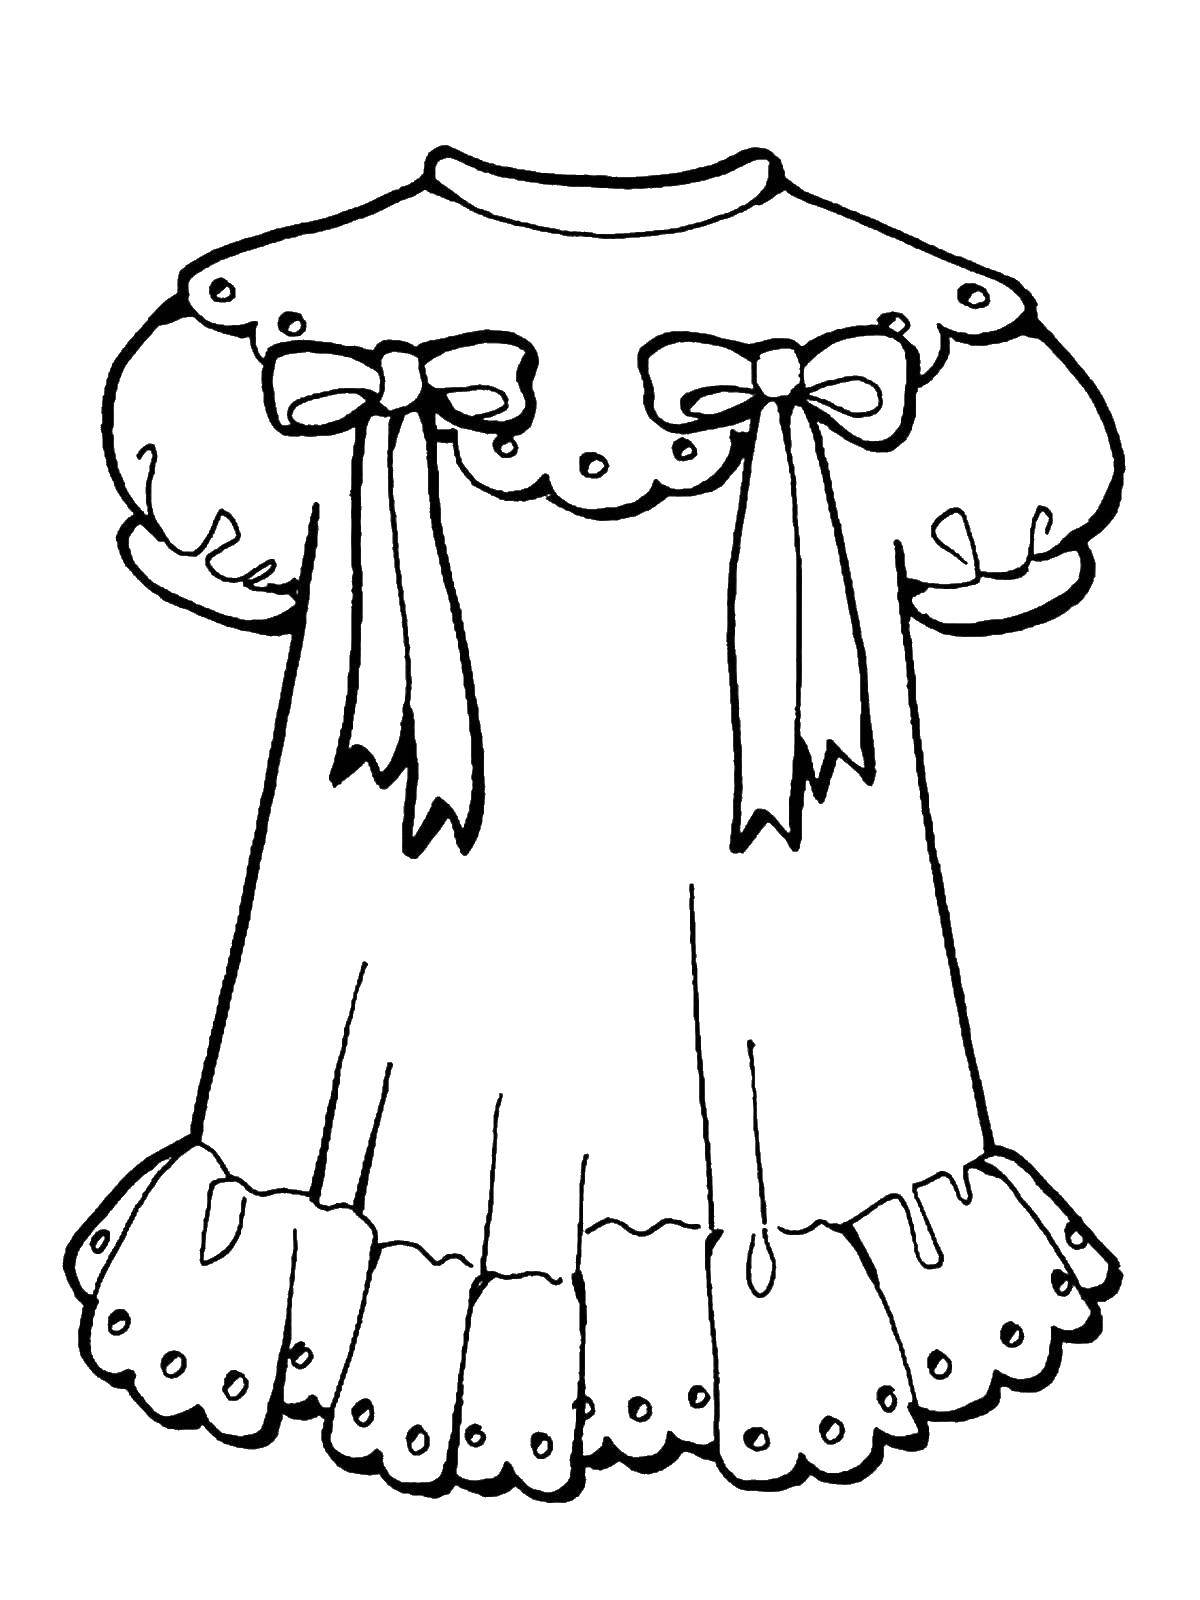 Coloring Dress with bows. Category Clothing. Tags:  clothing, dress.